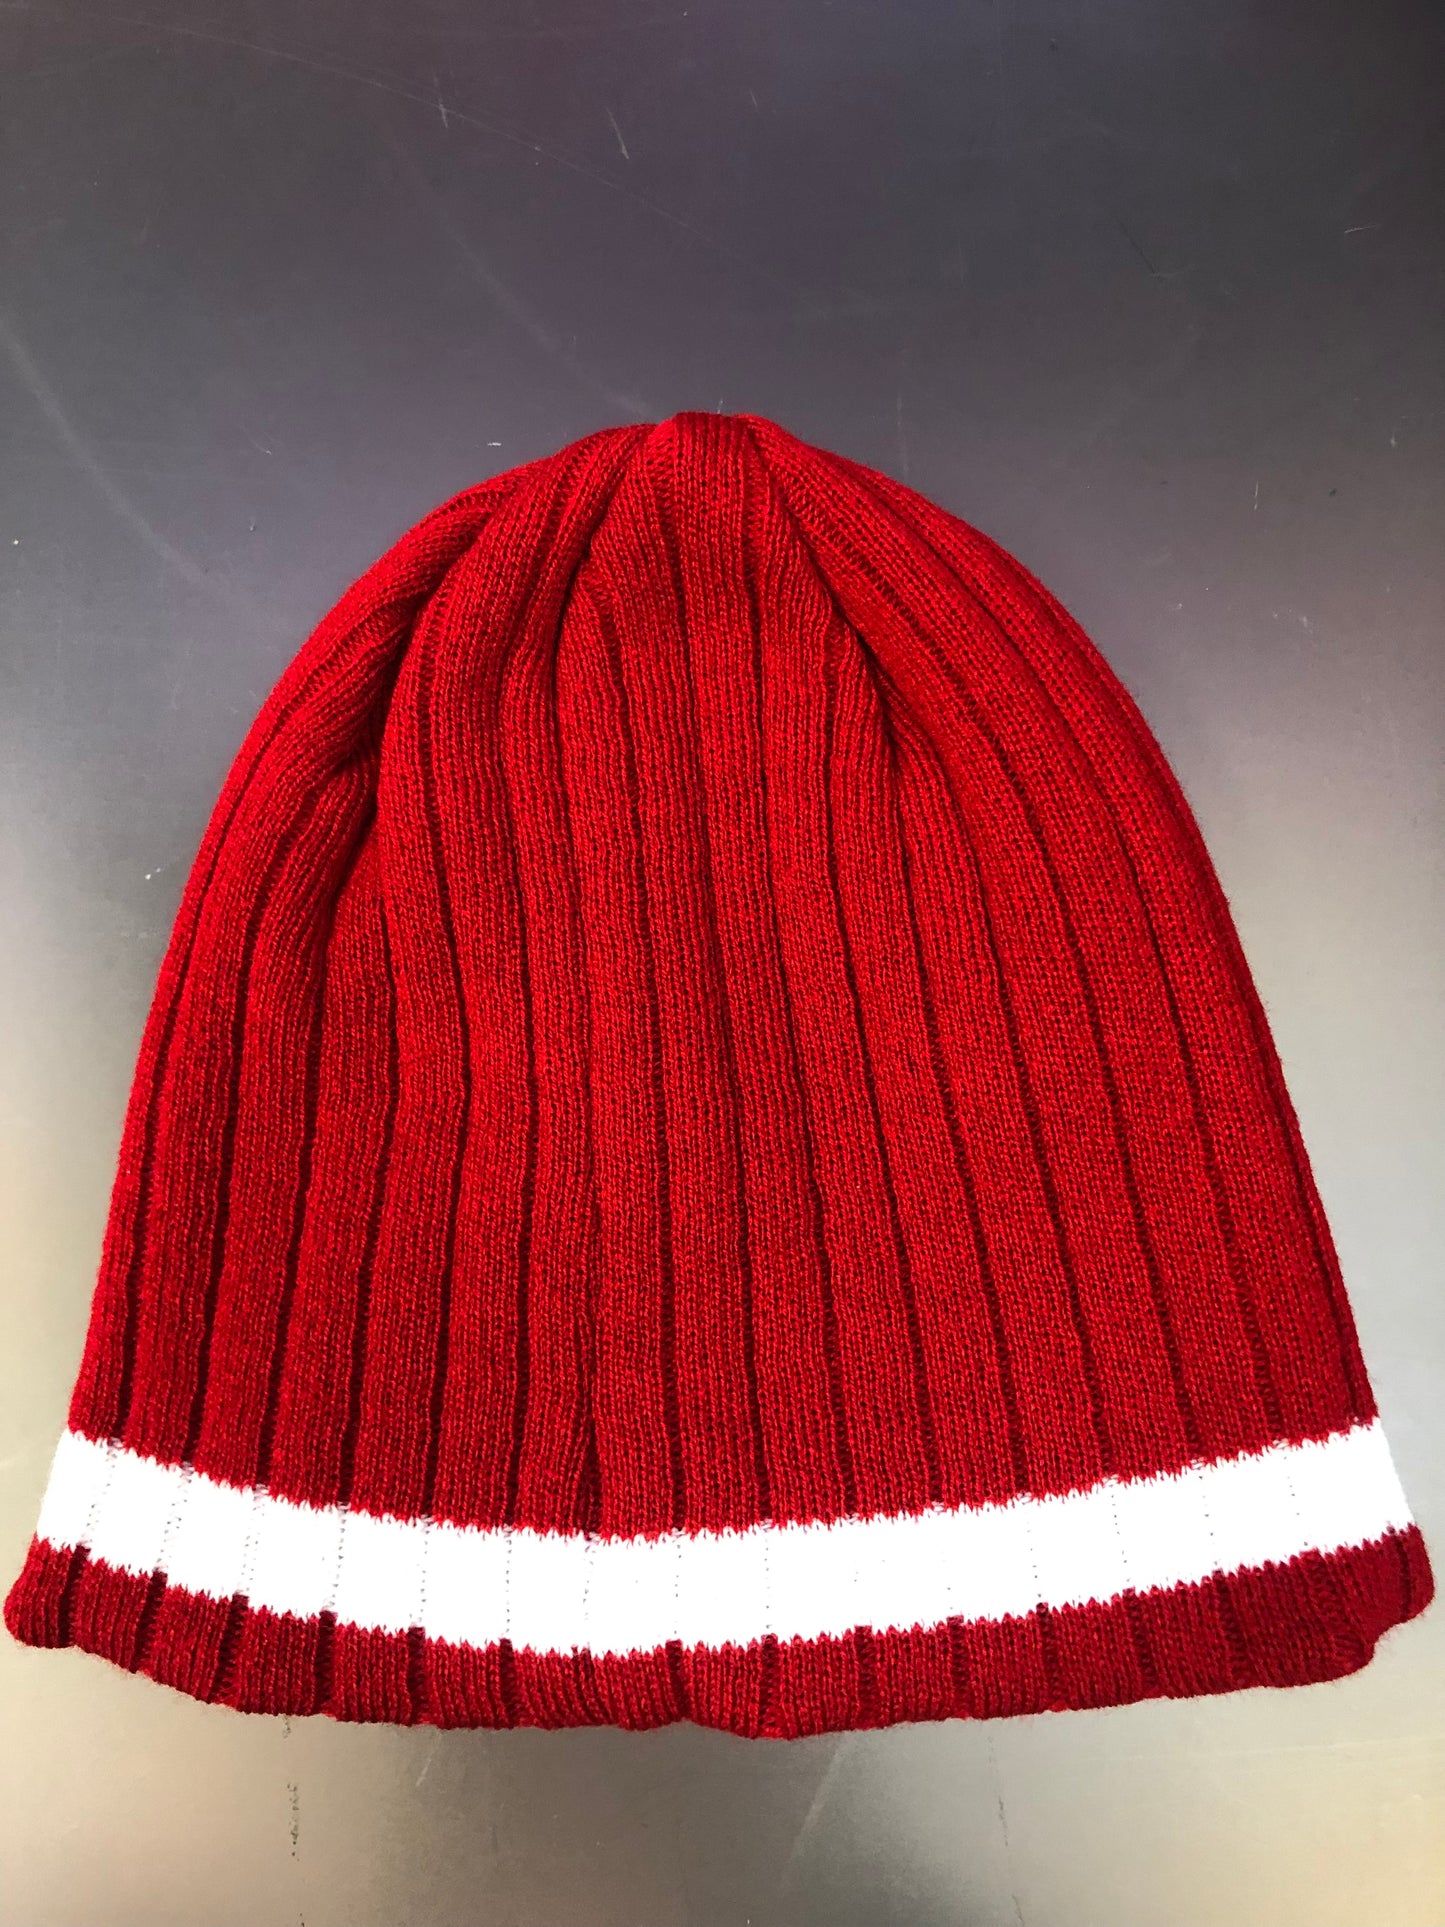 Polish Polska  Knit Winter Hat -RED With  Eagle- Made in Poland